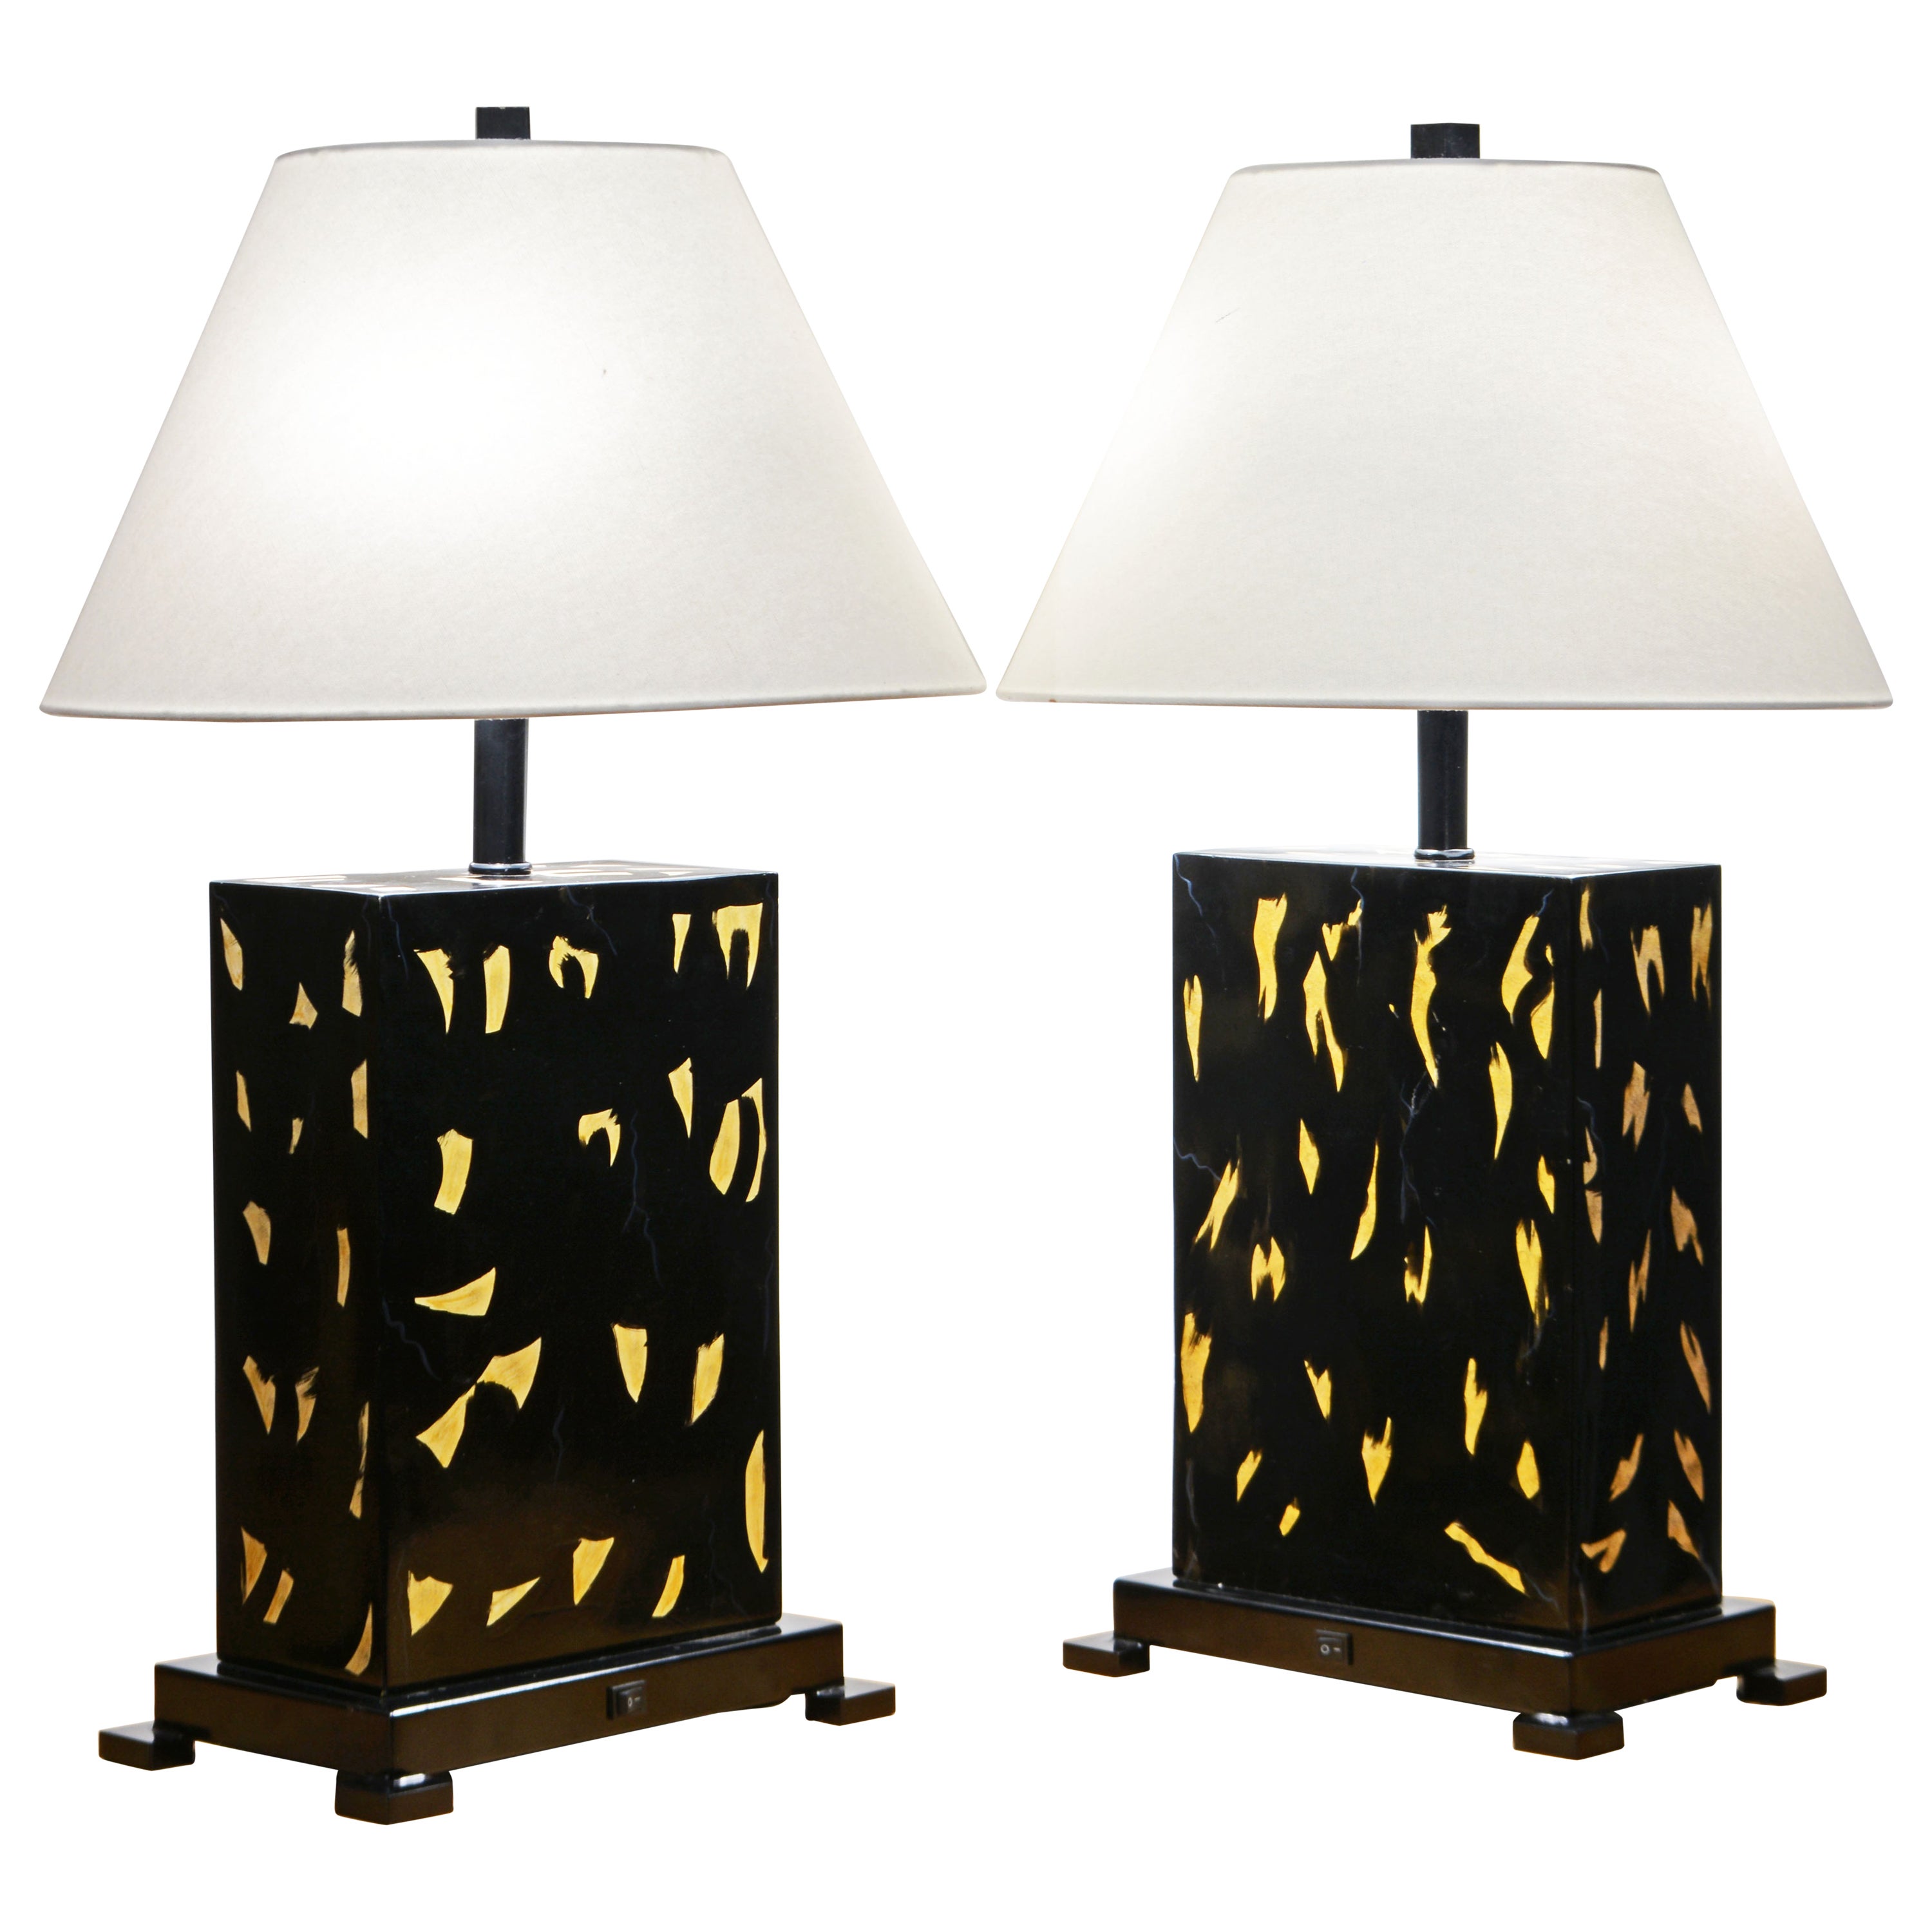 Pair of Archit Rectangular Lacquered Tablelamps w. Abstract Experssionist Motifs For Sale